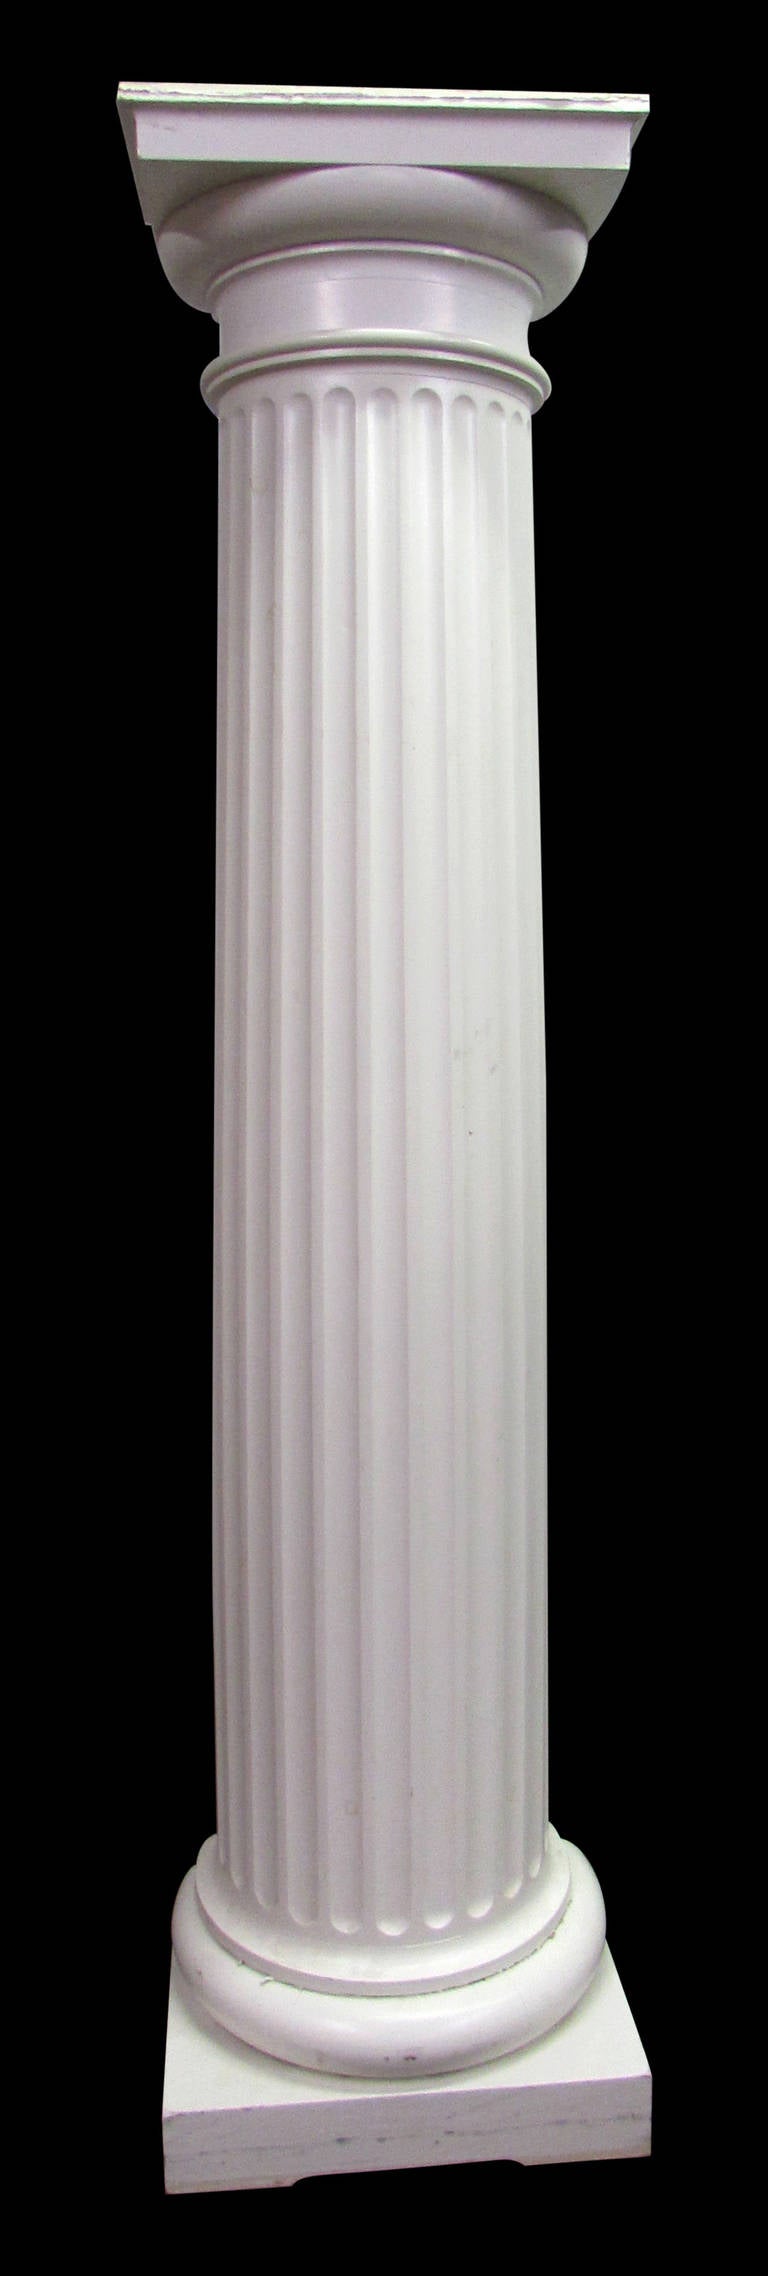 Very good quality salvaged 3/4 columns. These have an open back to be mounted against a wall. Priced per pair. Several pairs available at time of posting. This can be seen at our 400 Gilligan St location in Scranton, PA.